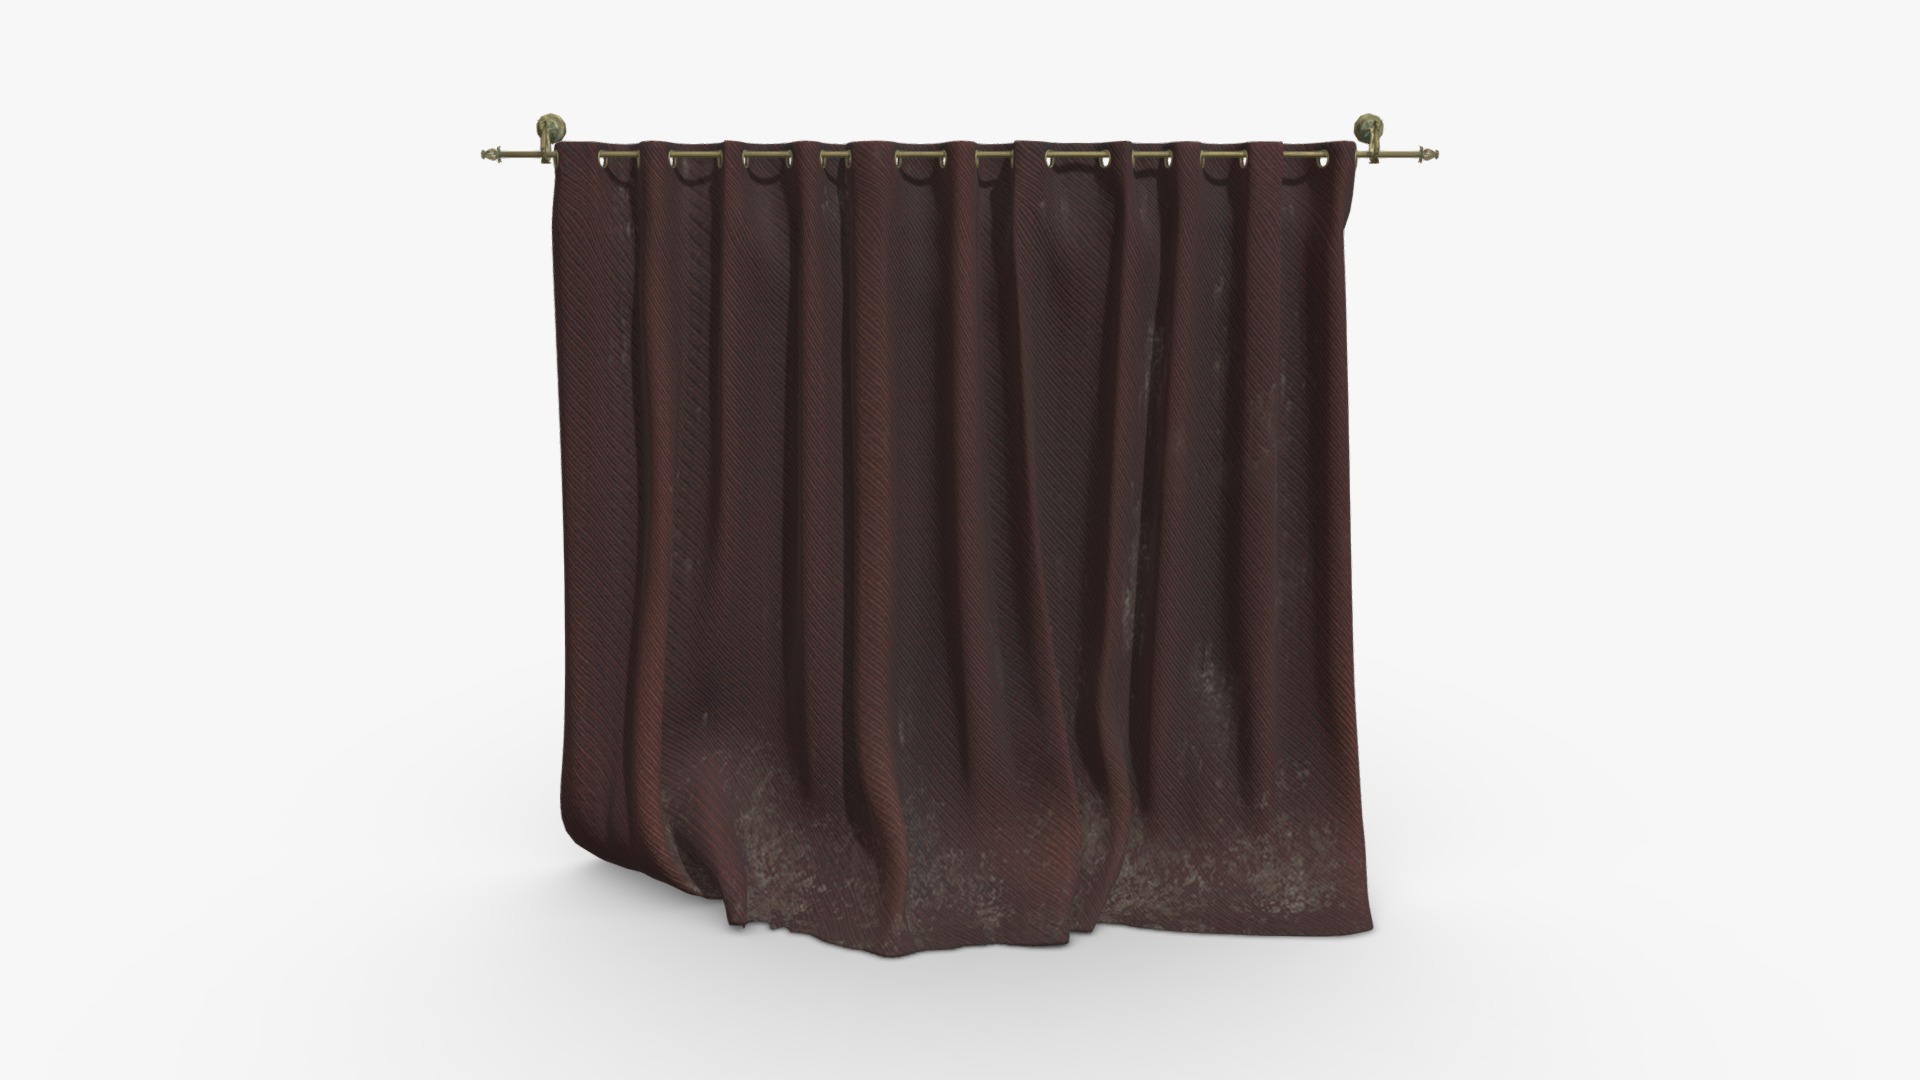 3D model Ivy Ornamental Curtains - This is a 3D model of the Ivy Ornamental Curtains. The 3D model is about a row of black books.